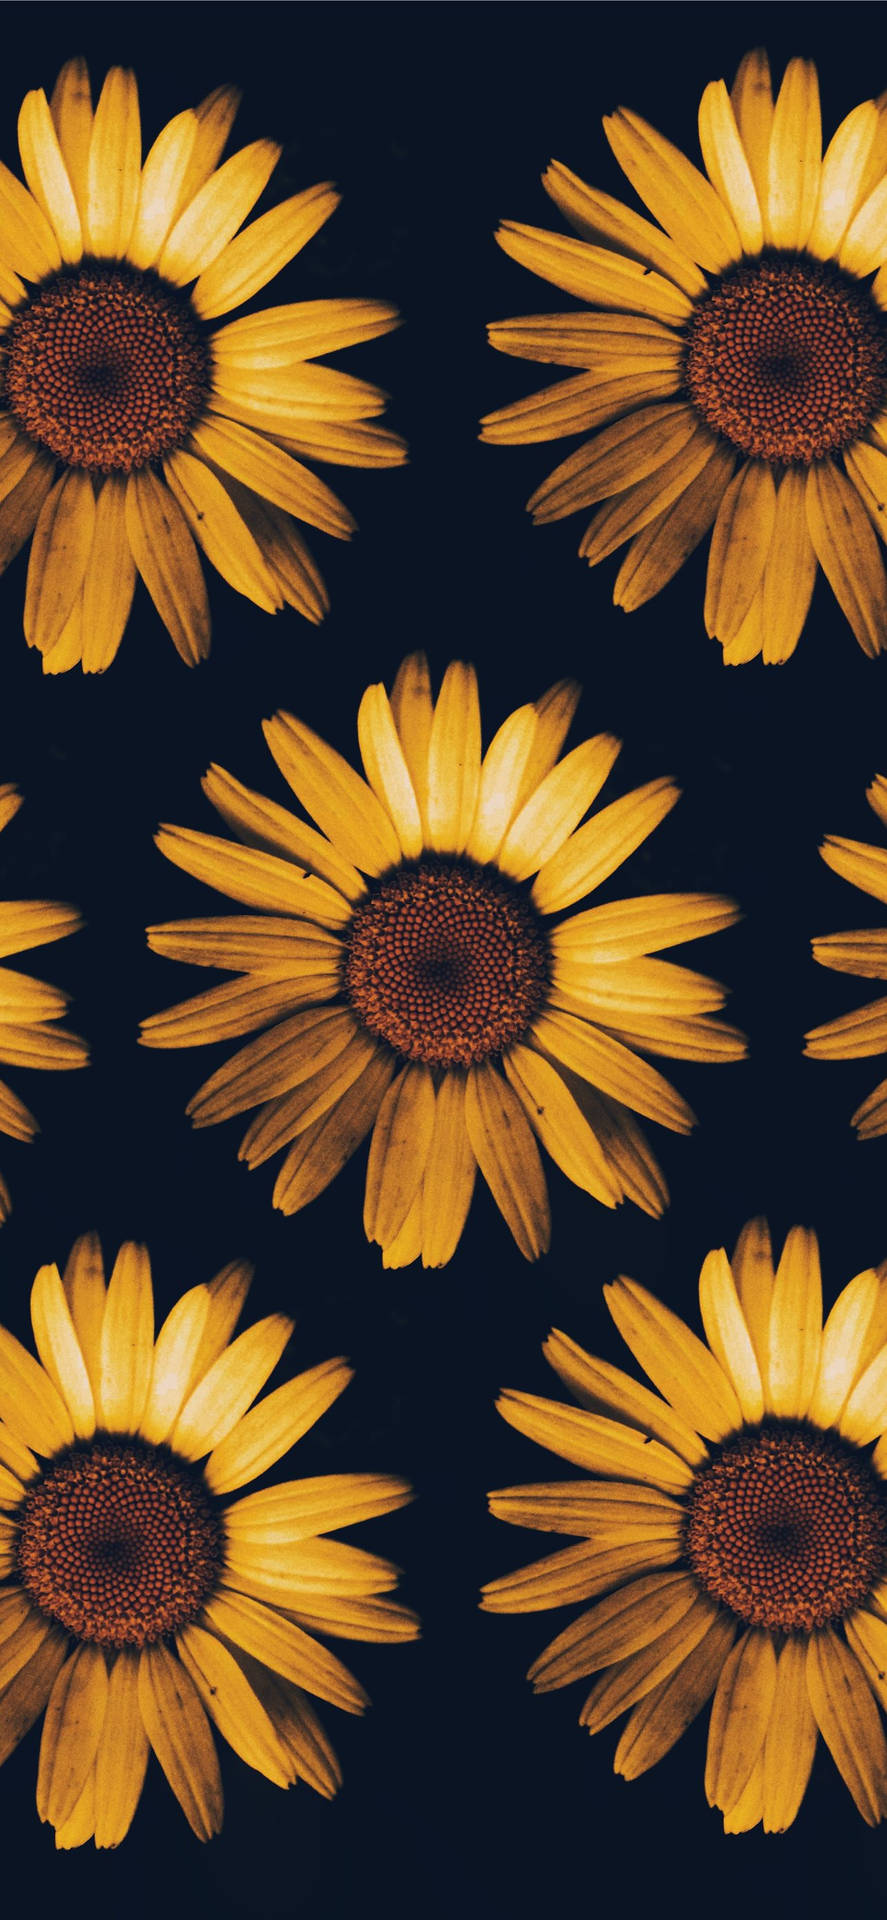 Black And Yellow Sunflower Iphone Background